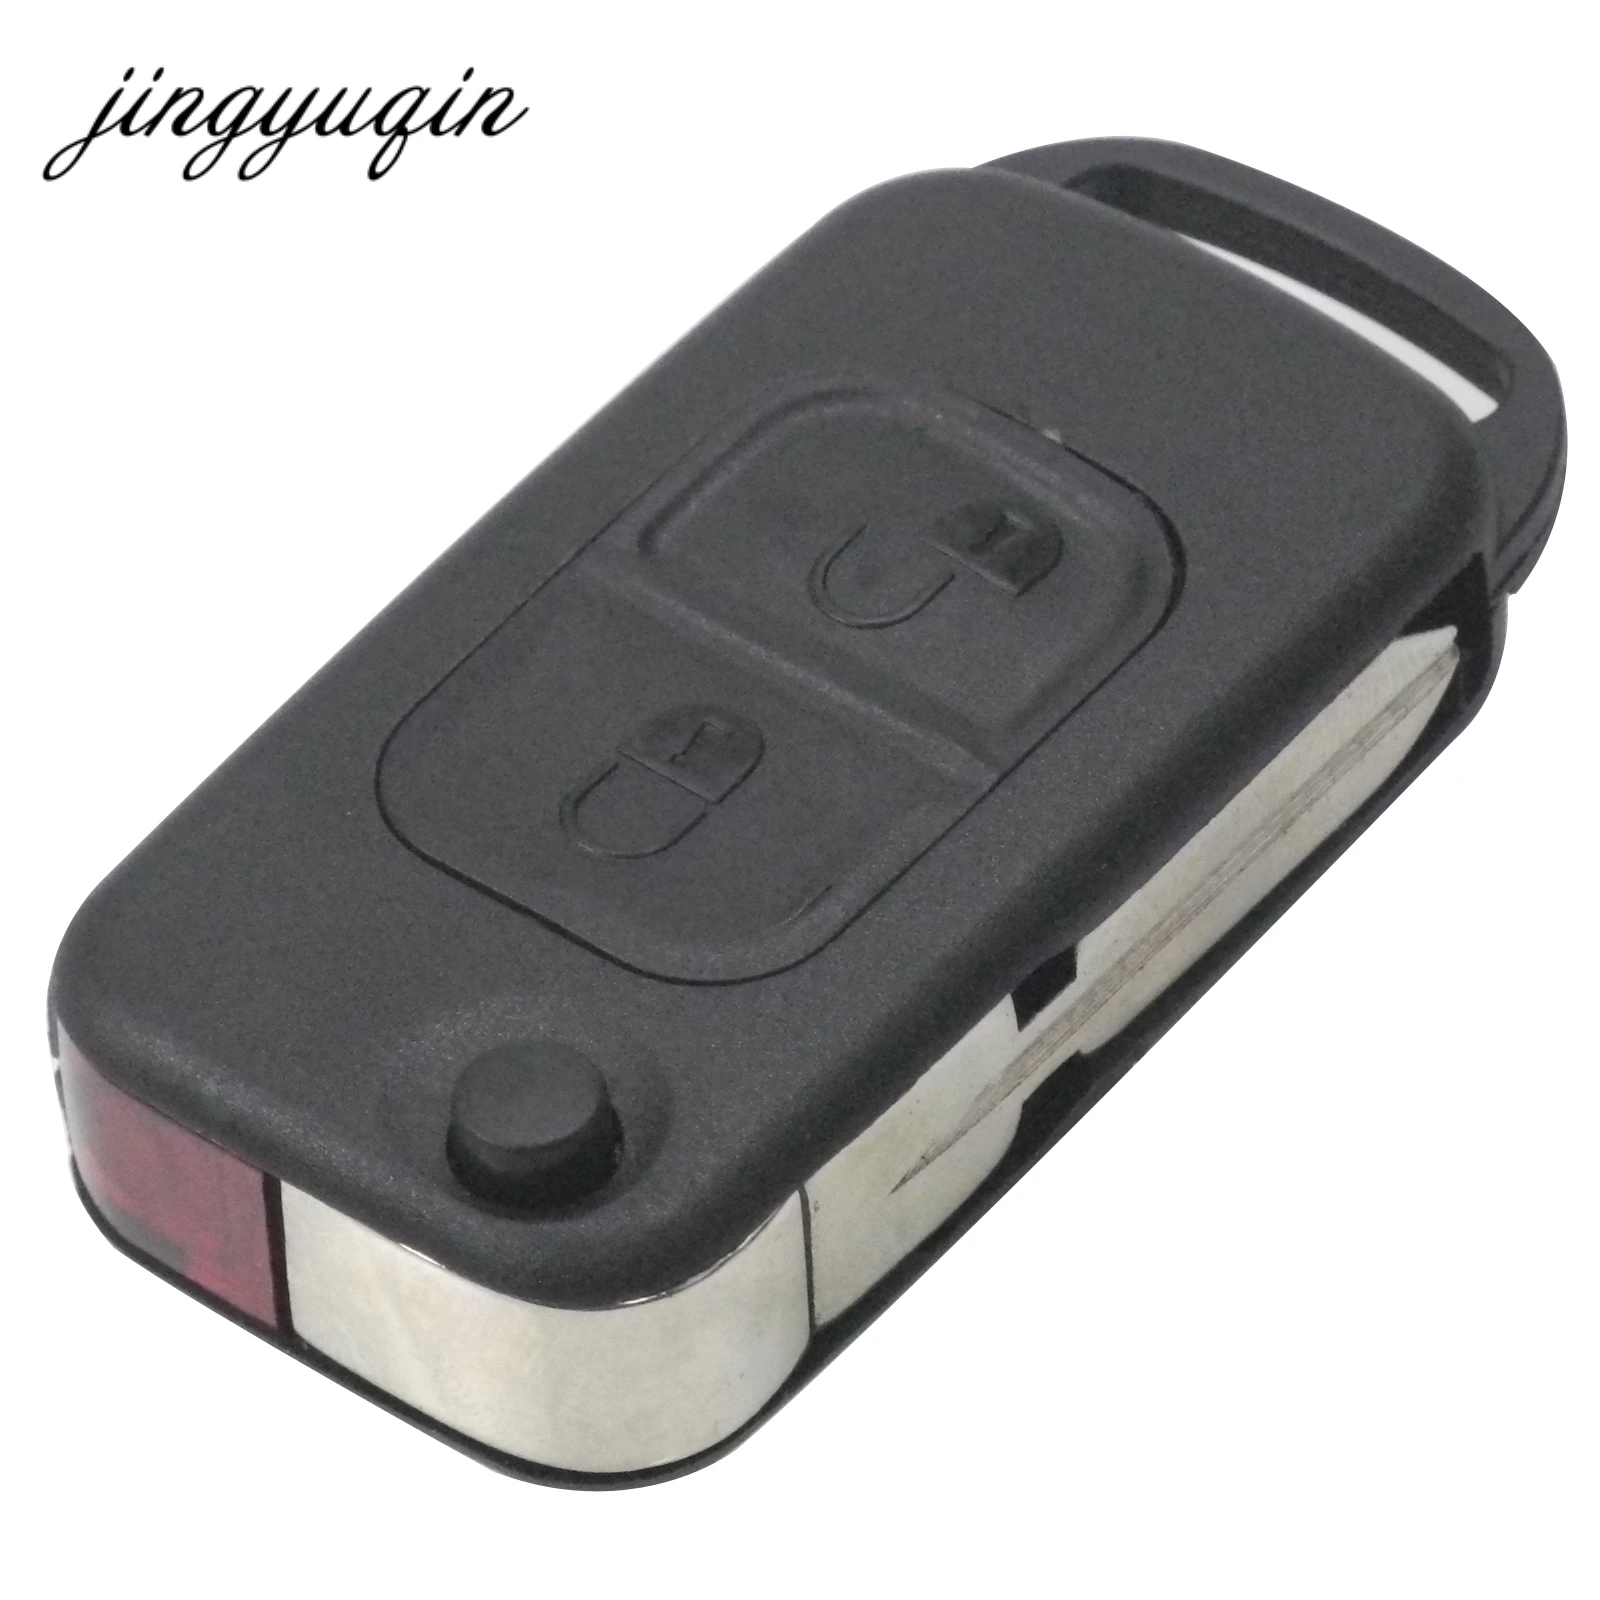 jingyuqin 2 Button Flip Folding Key Shell Case for Mercedes for Benz A C E S Entry HU39 Remote Key Cover Replacement Car Styling